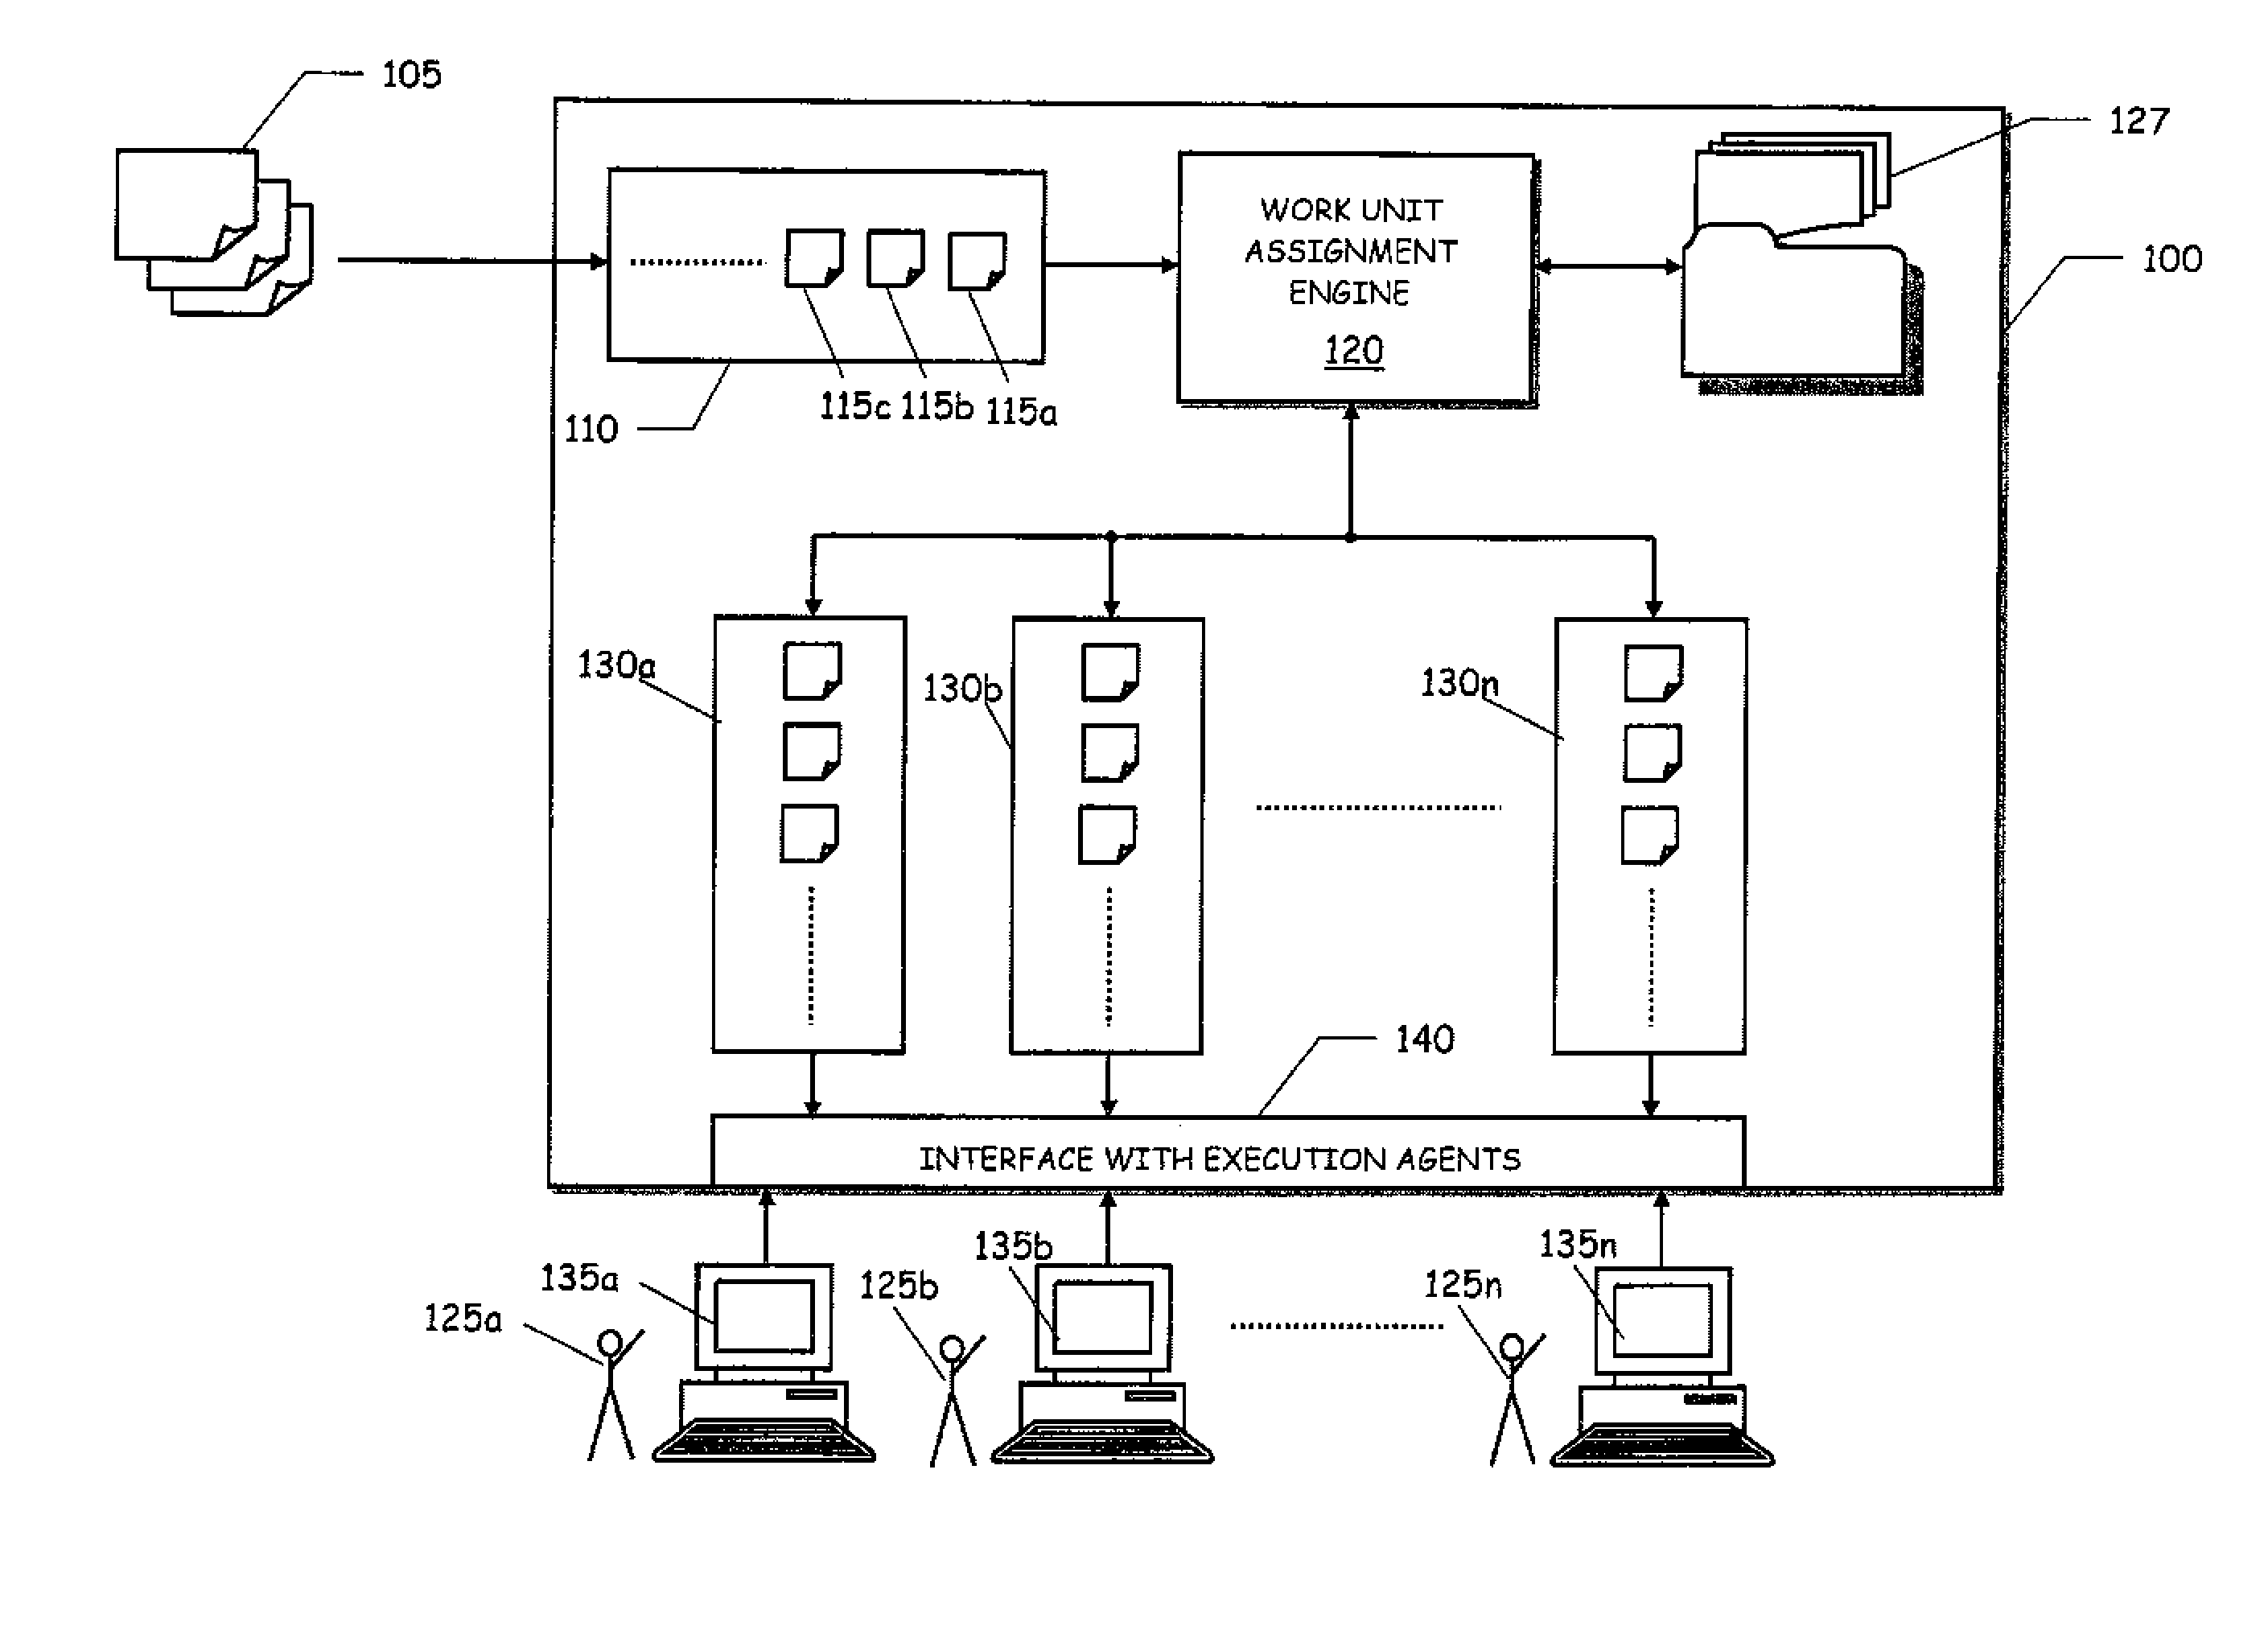 Method and system for automatic assignment of work units to agents